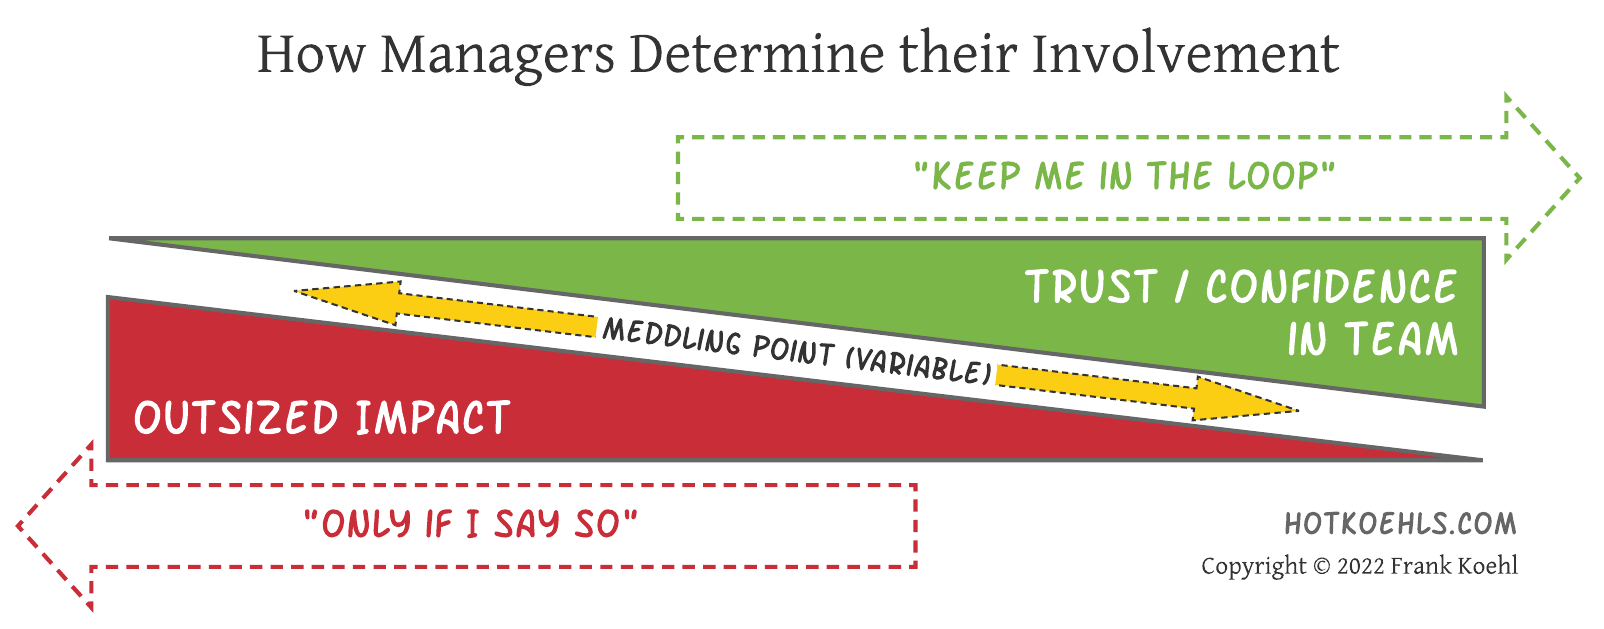 how managers determine their involvement